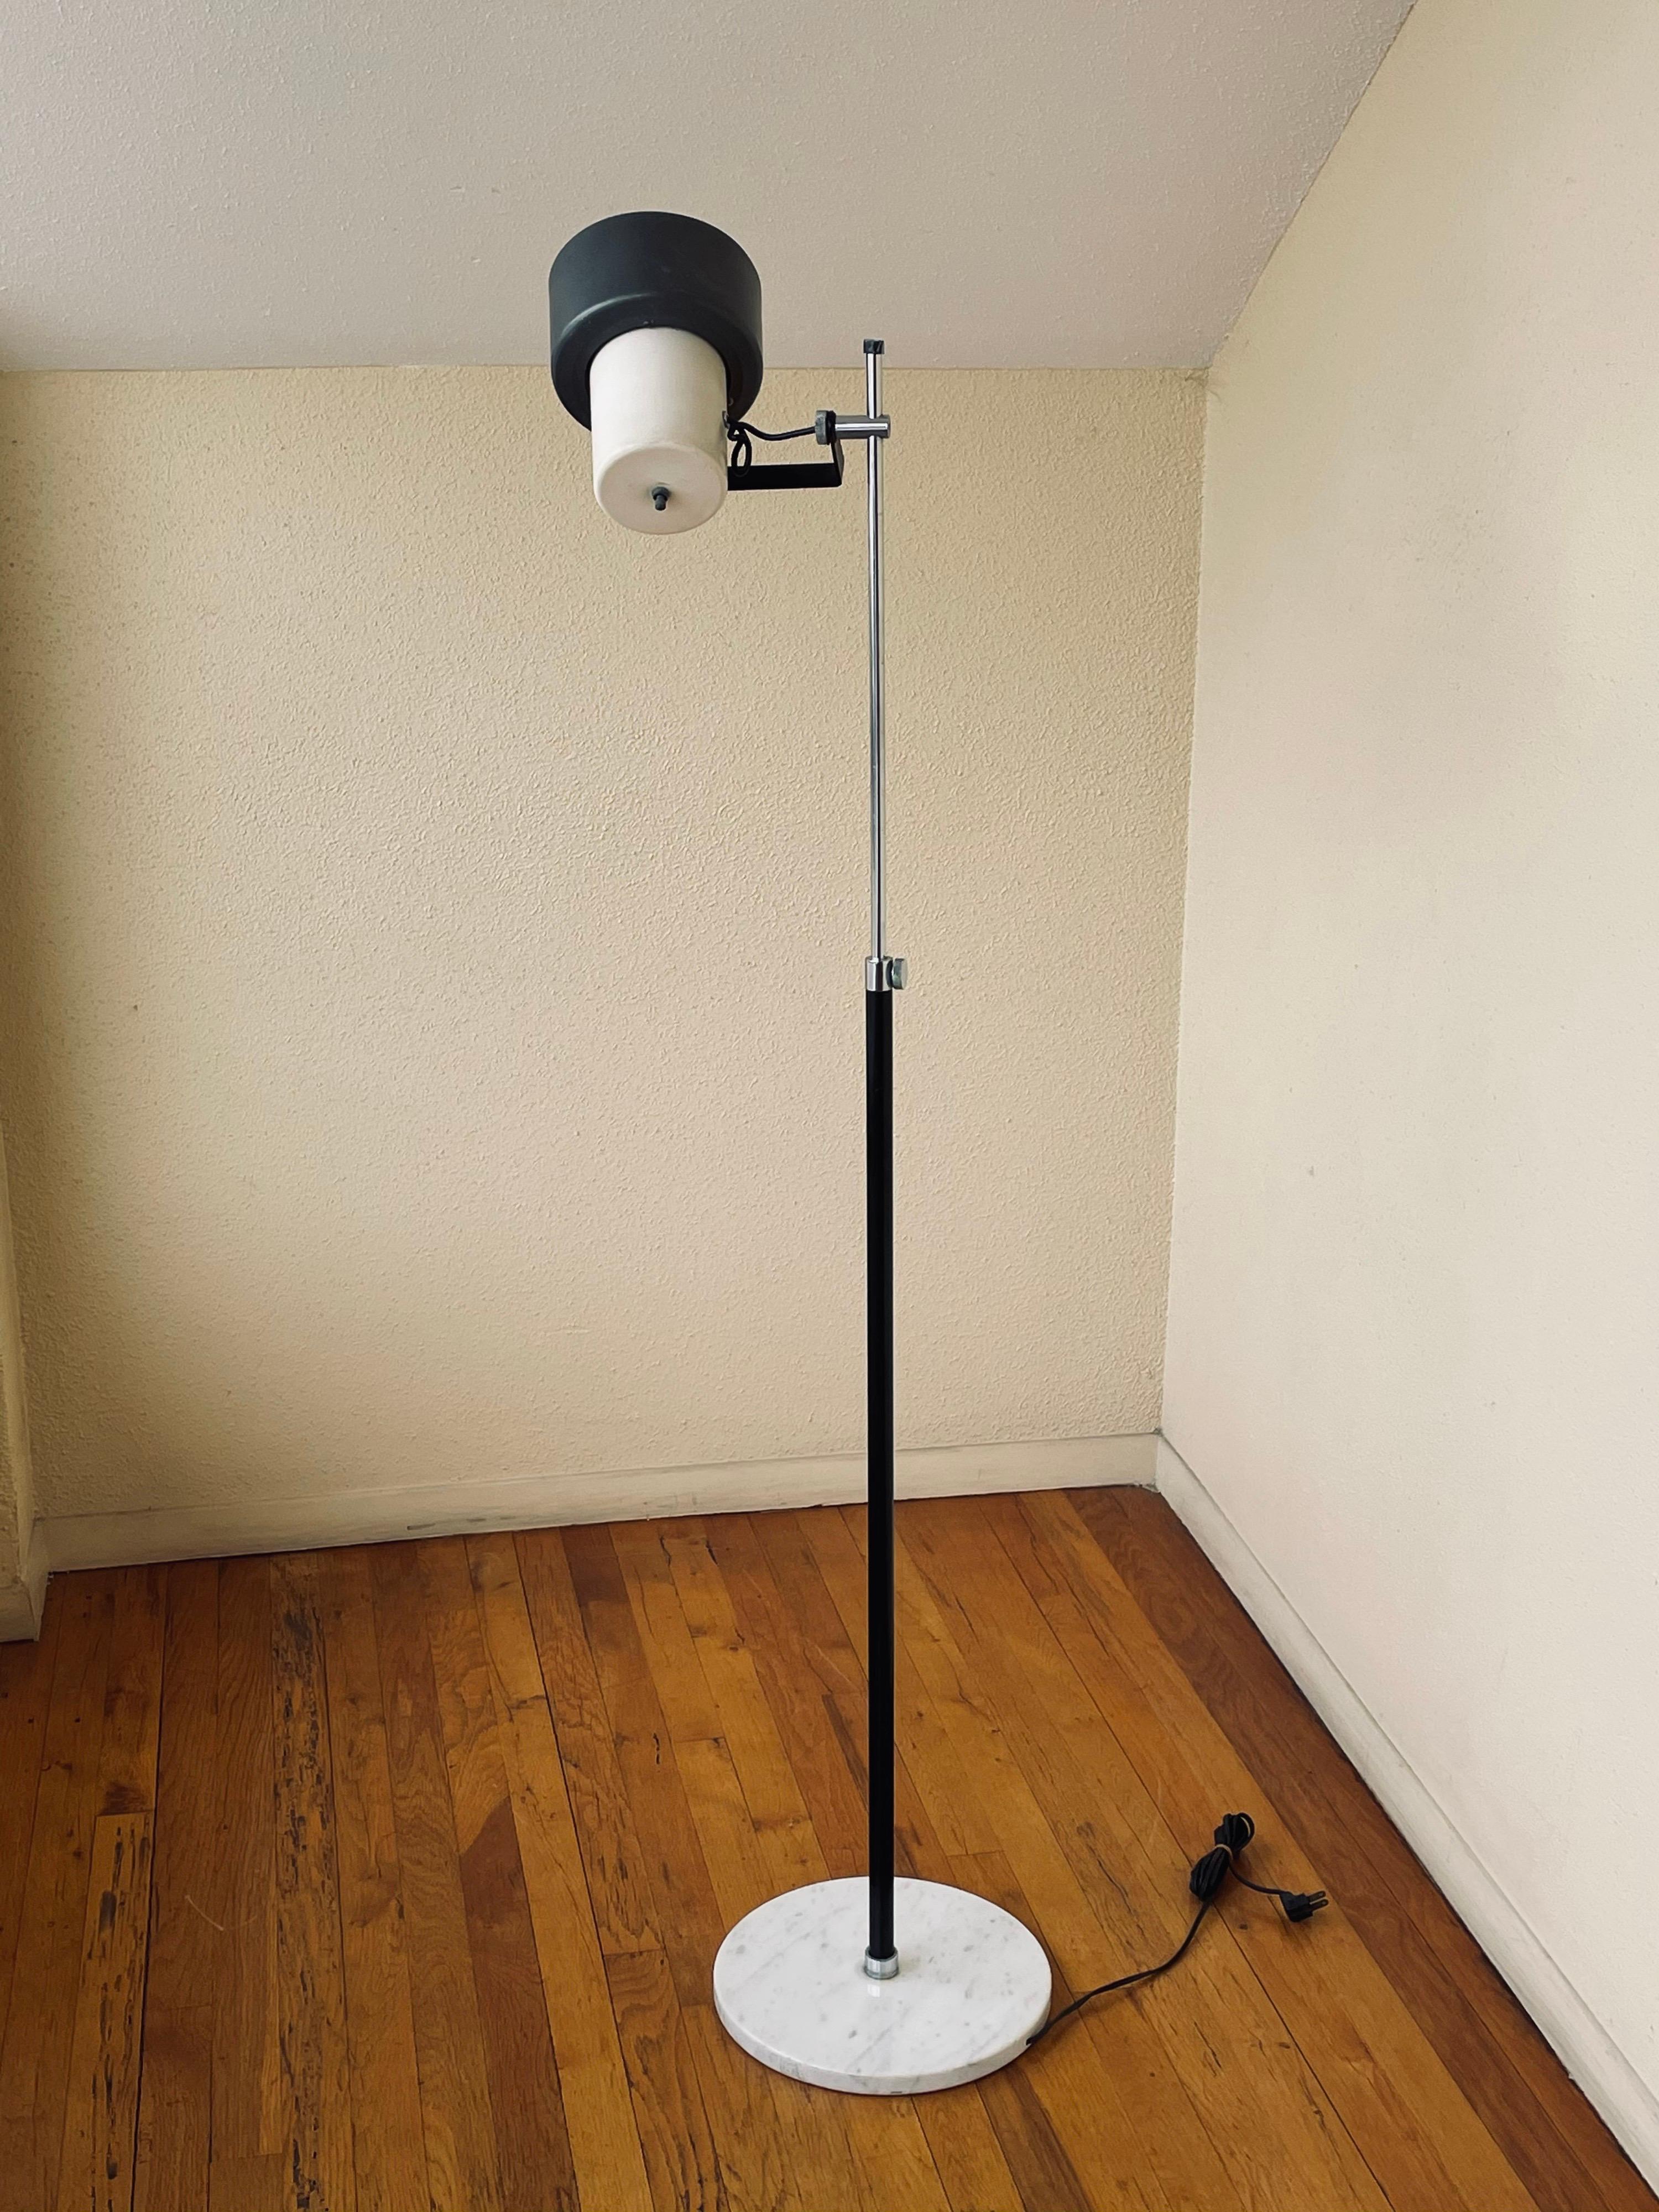 Simple modern circa 1970s multidirectional spot floor lamp by Arteluce, adjustable chrome post and swivel hade that rotates to any direction, sitting on solid marble round base. The lamp adjusts from 40